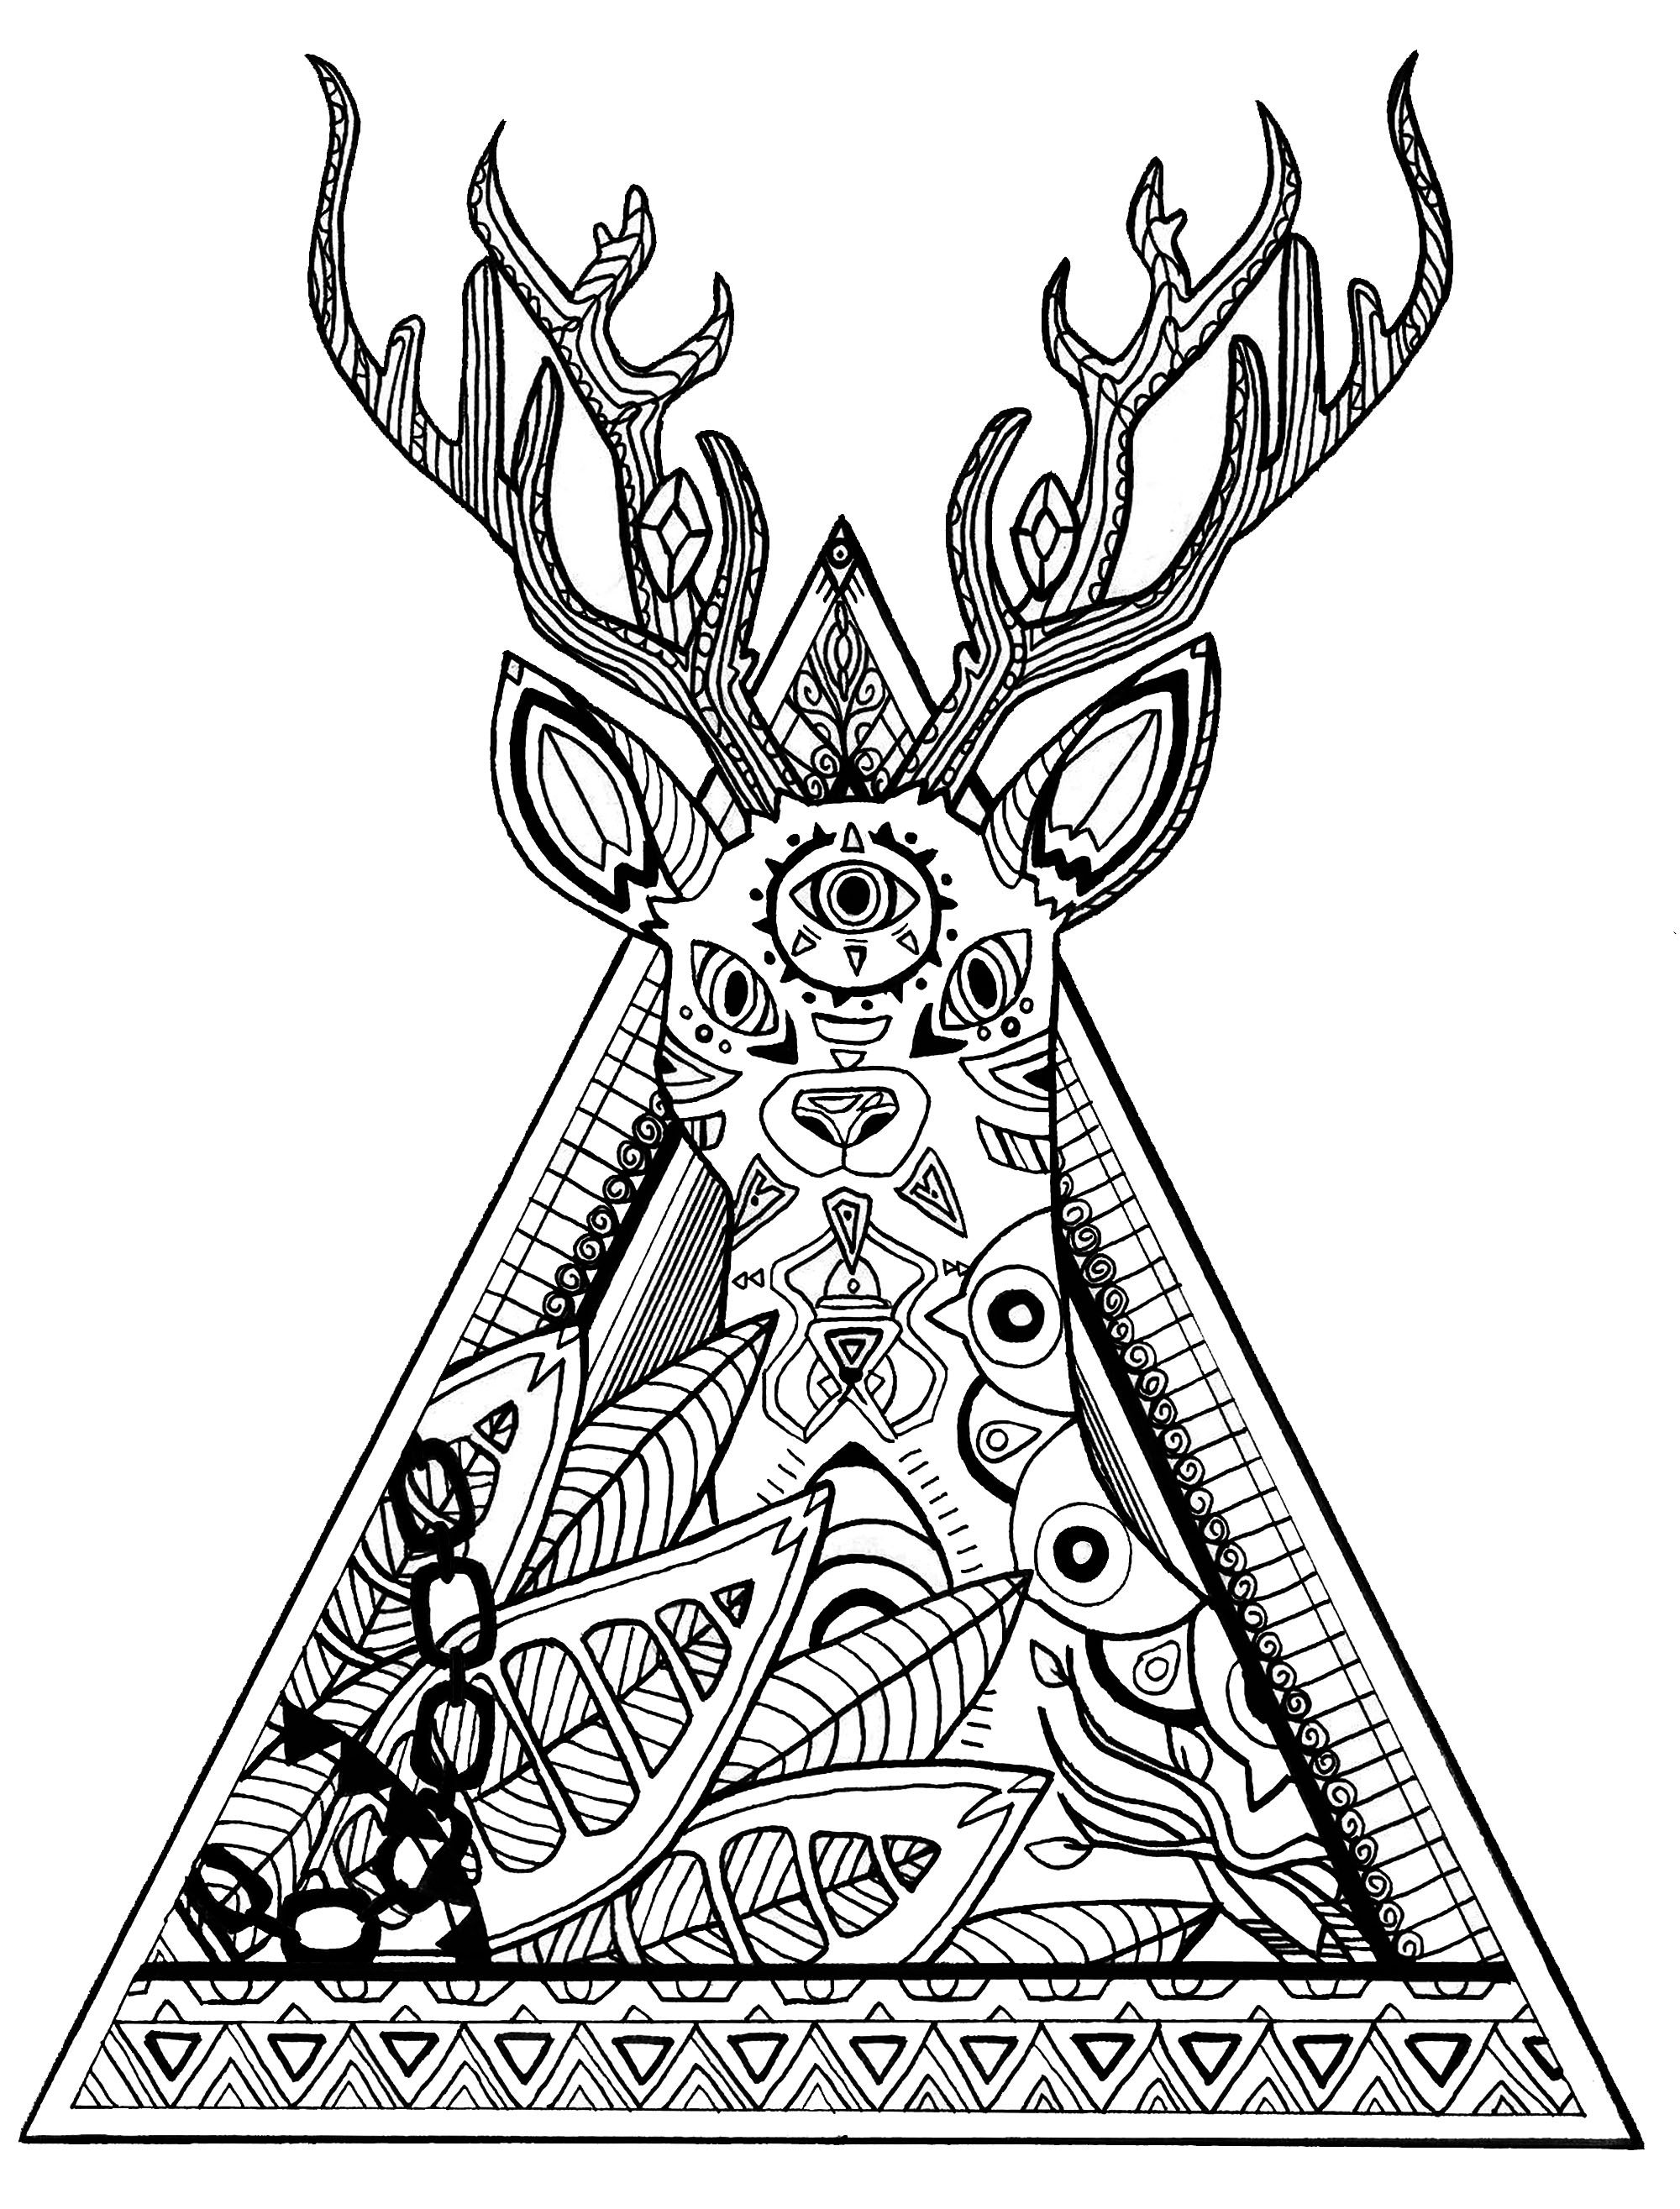 Deer in a triangle - Deers Adult Coloring Pages